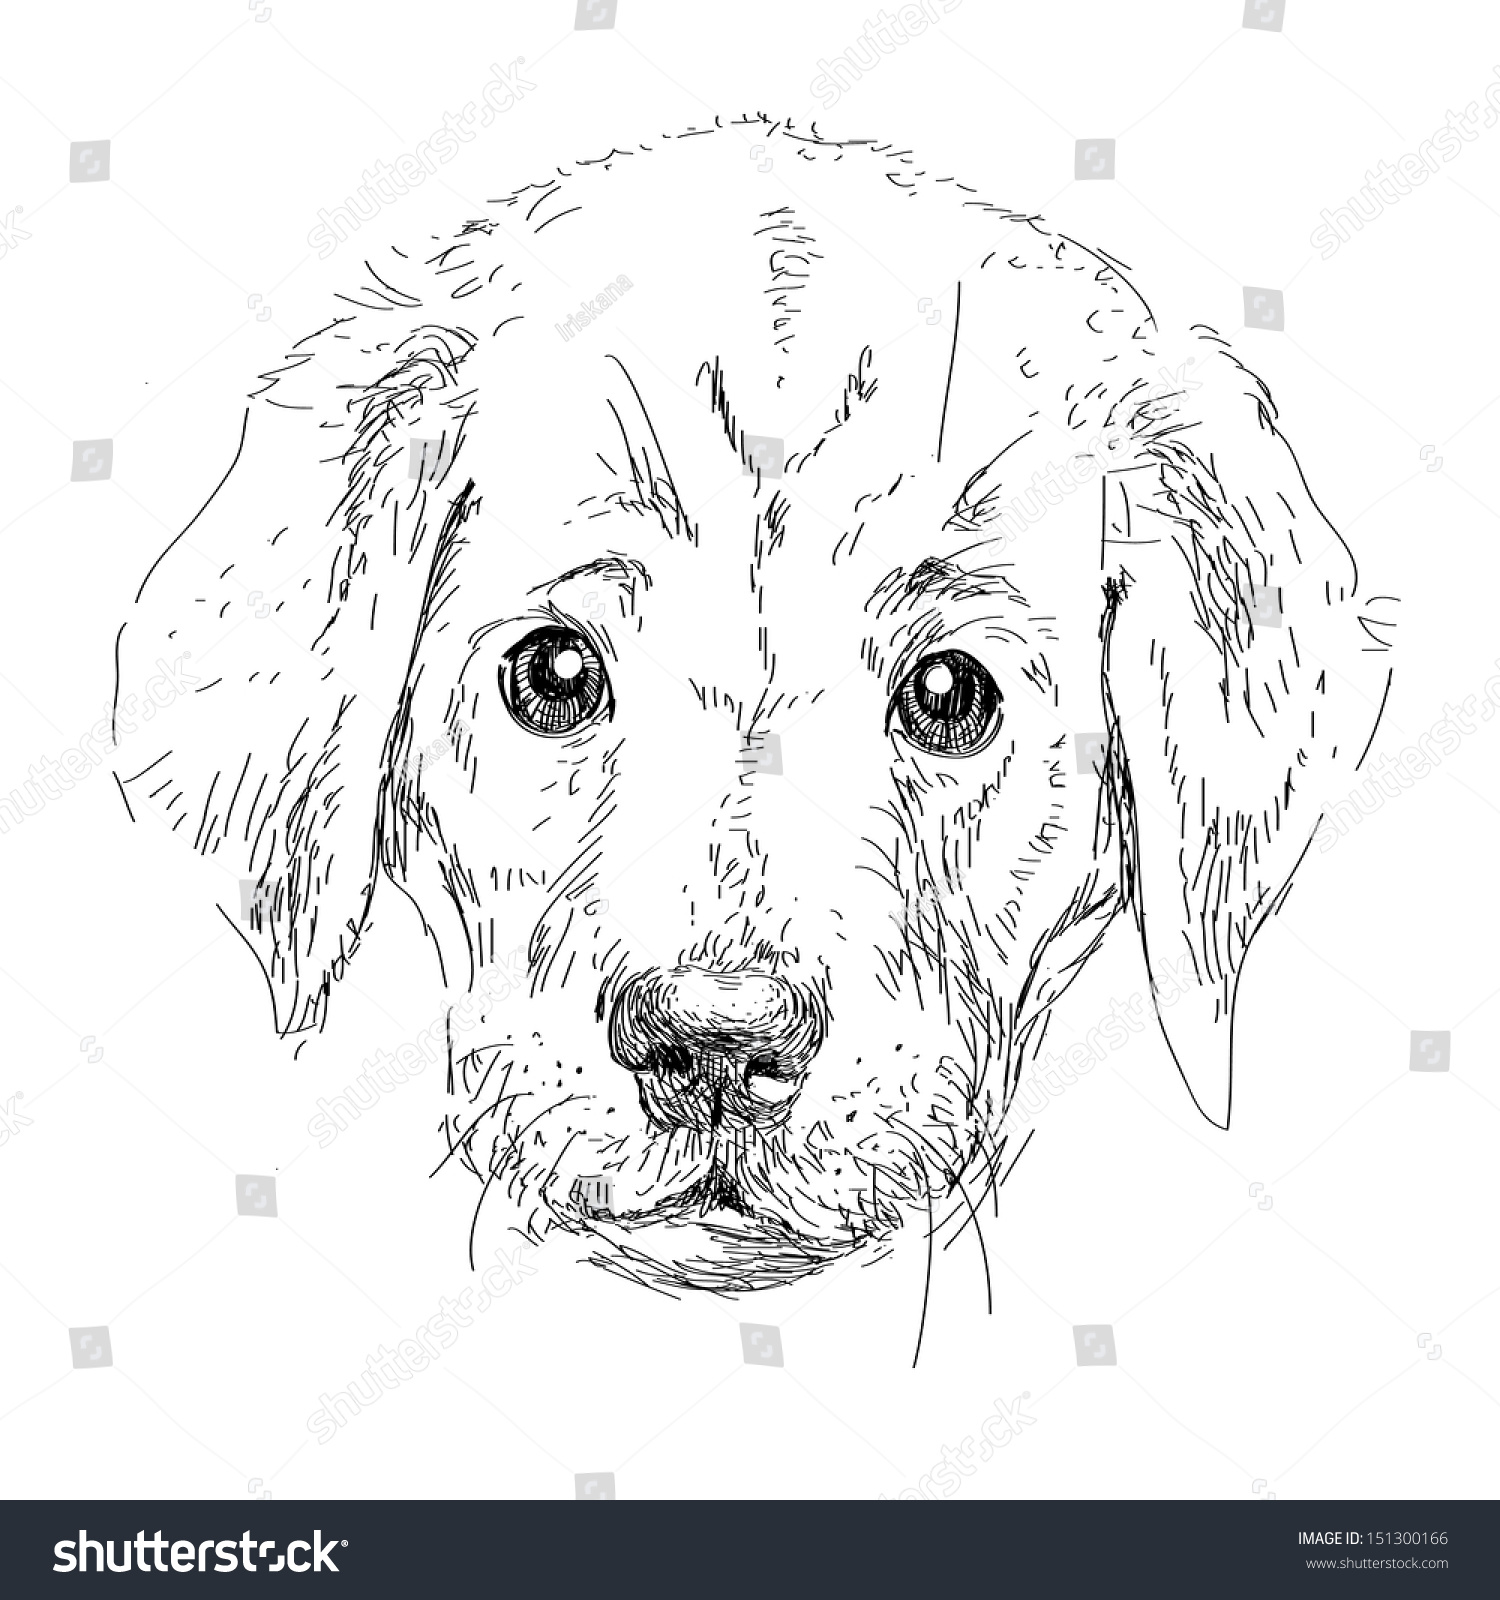 Puppy Labrador Head Isolated In Vector - 151300166 : Shutterstock